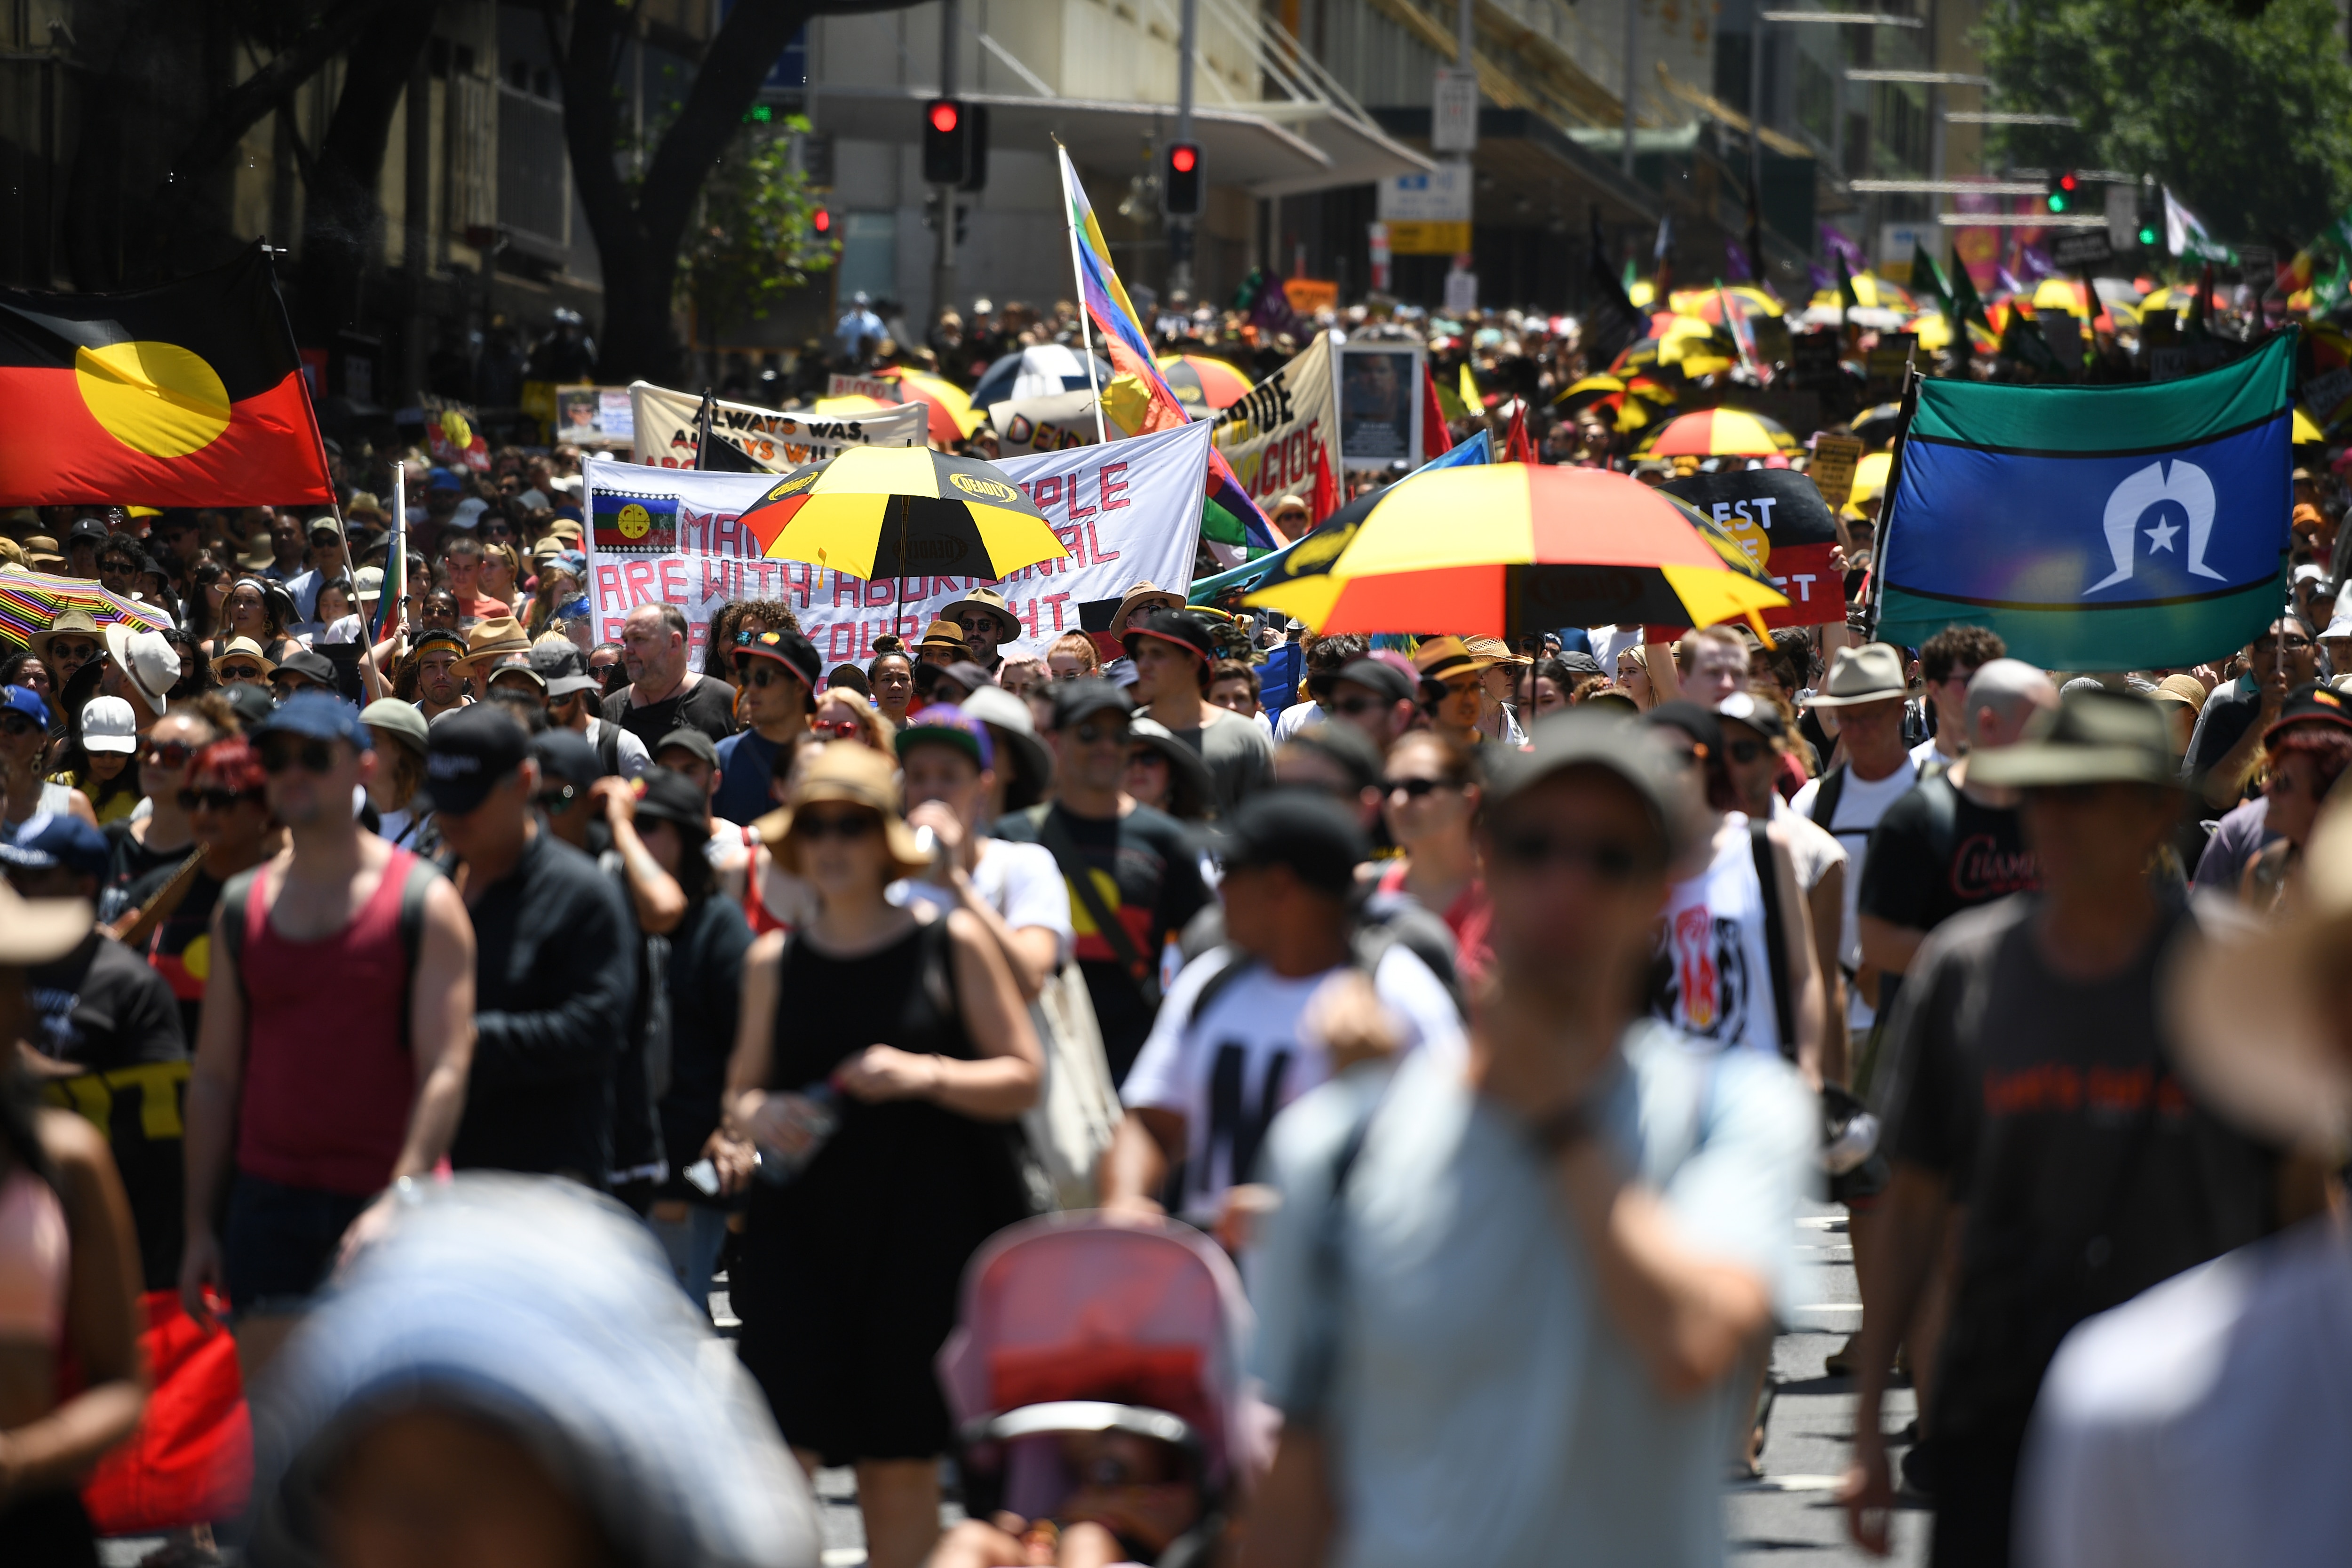 The Invasion Day rally in Sydney last year.